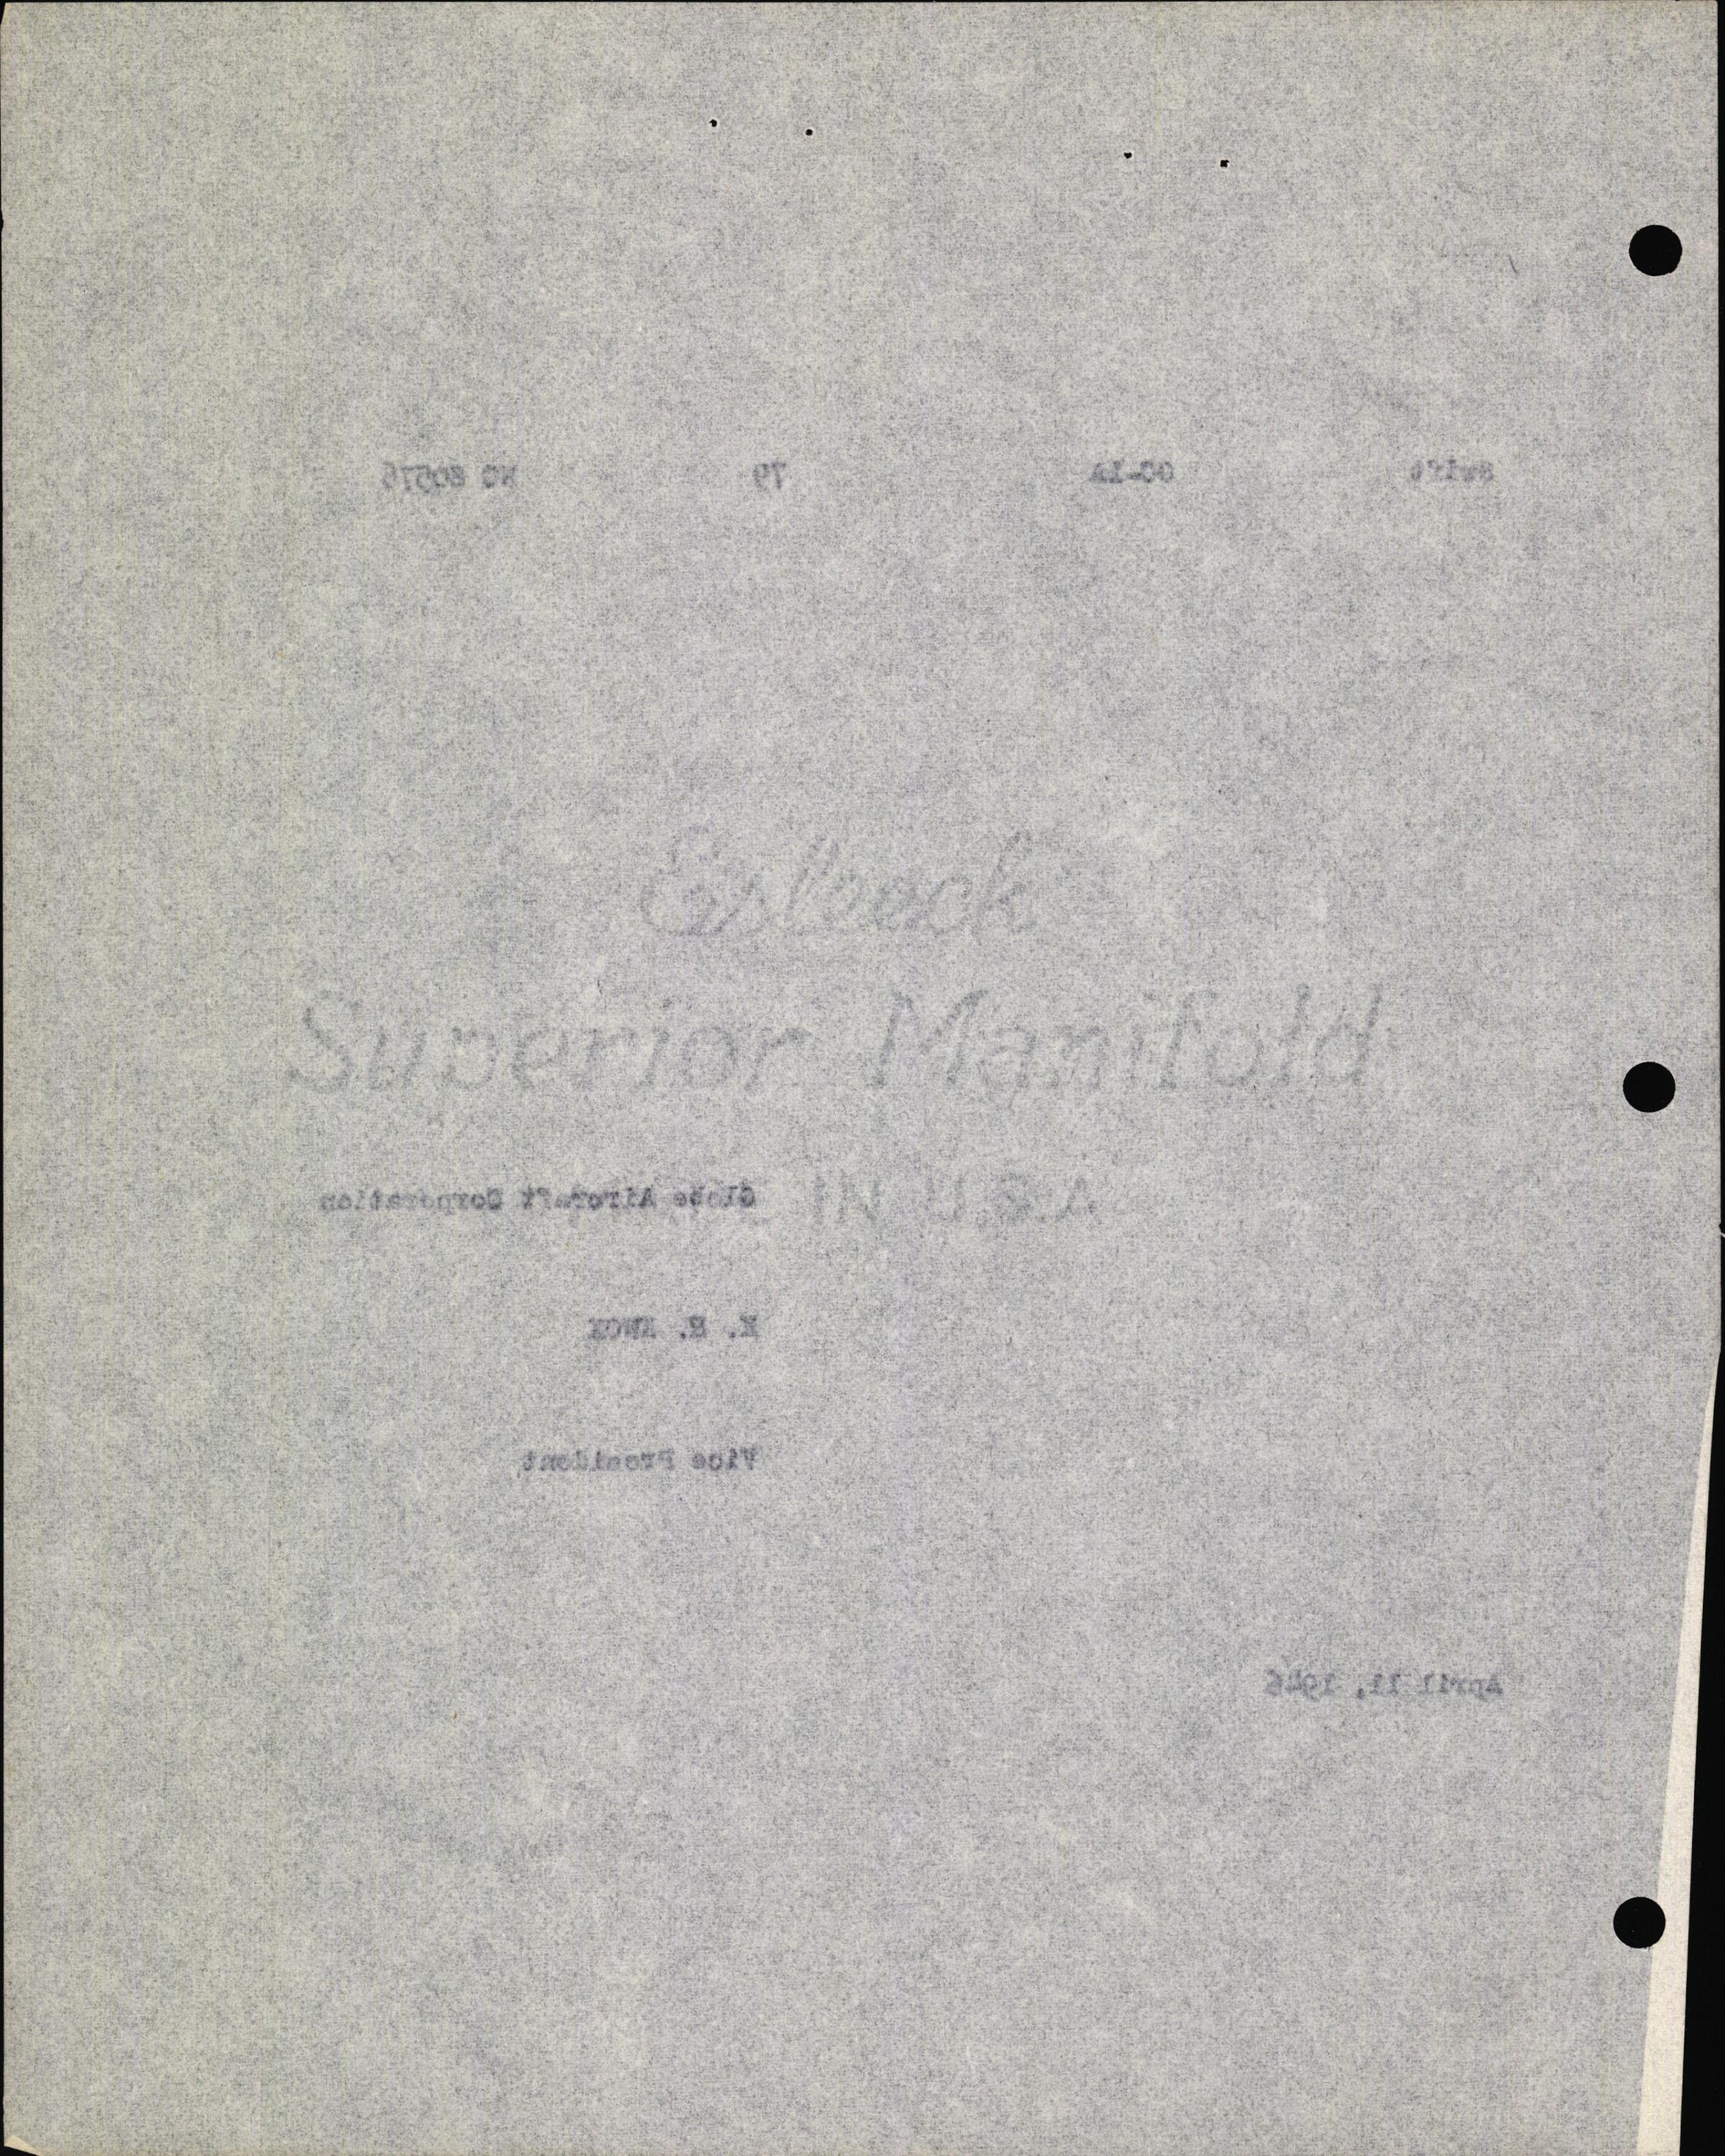 Sample page 8 from AirCorps Library document: Technical Information for Serial Number 79